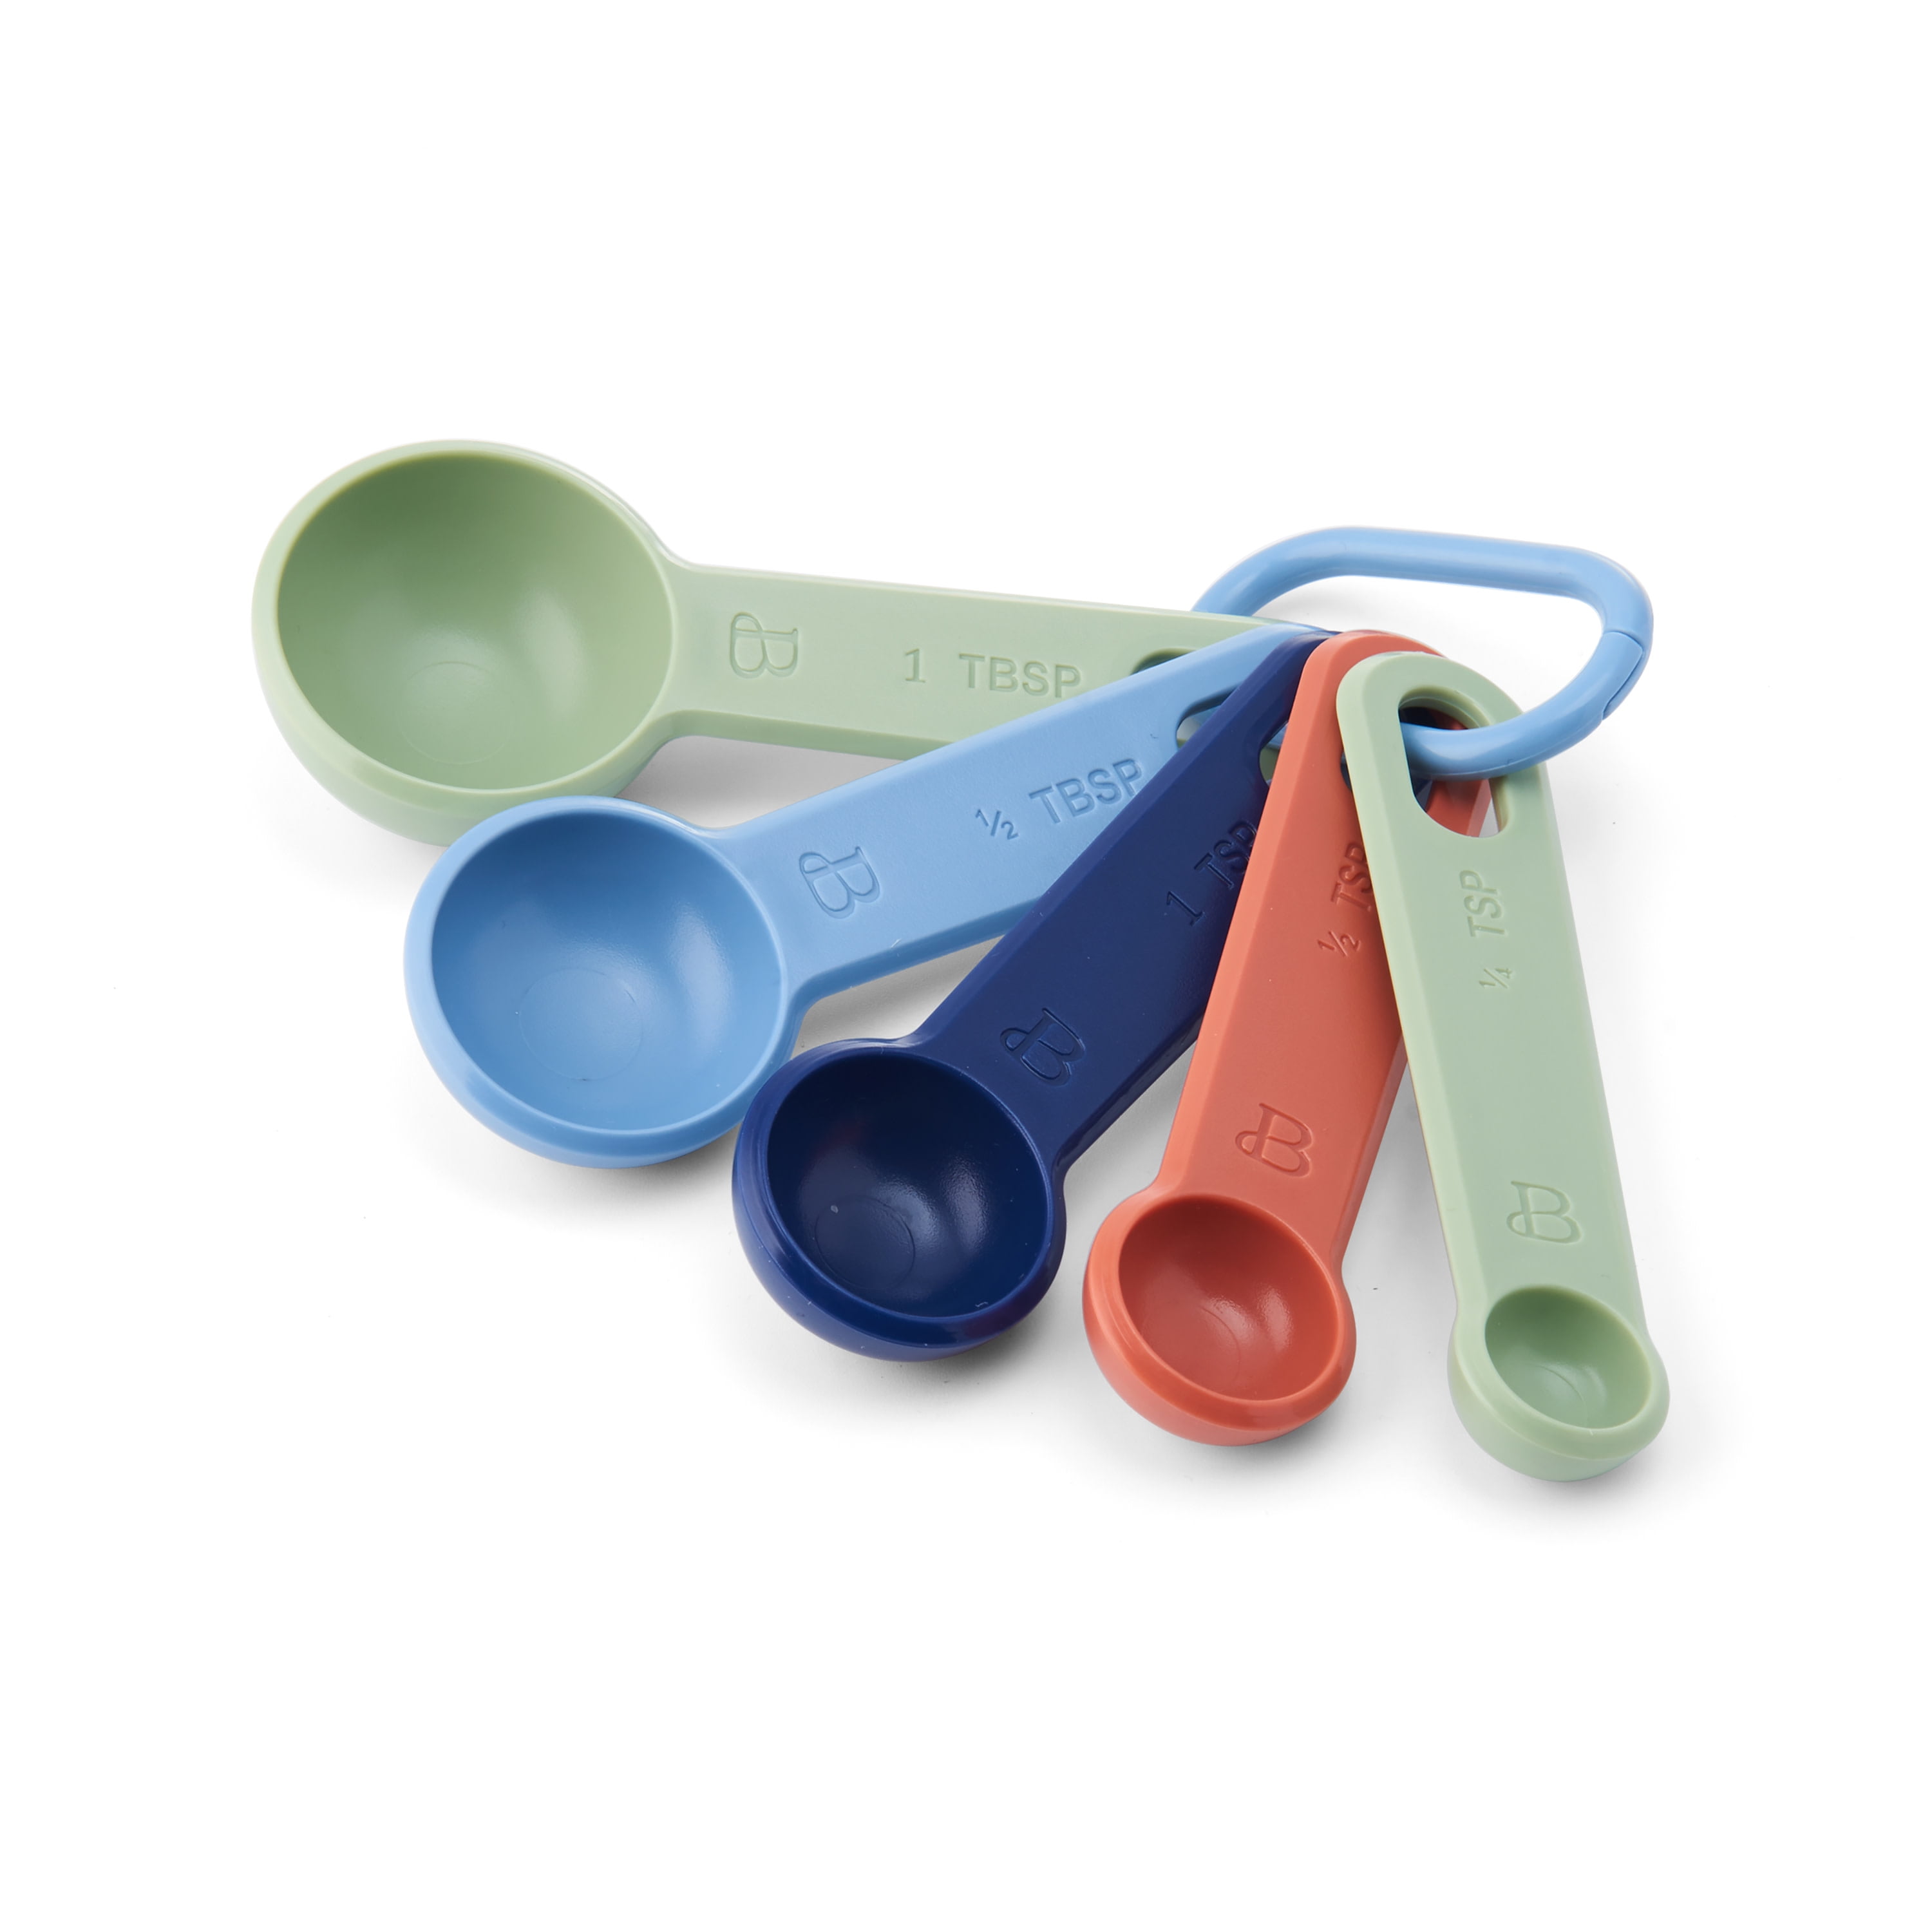 These fruity ceramic measuring spoons that'll put you in a good mood.